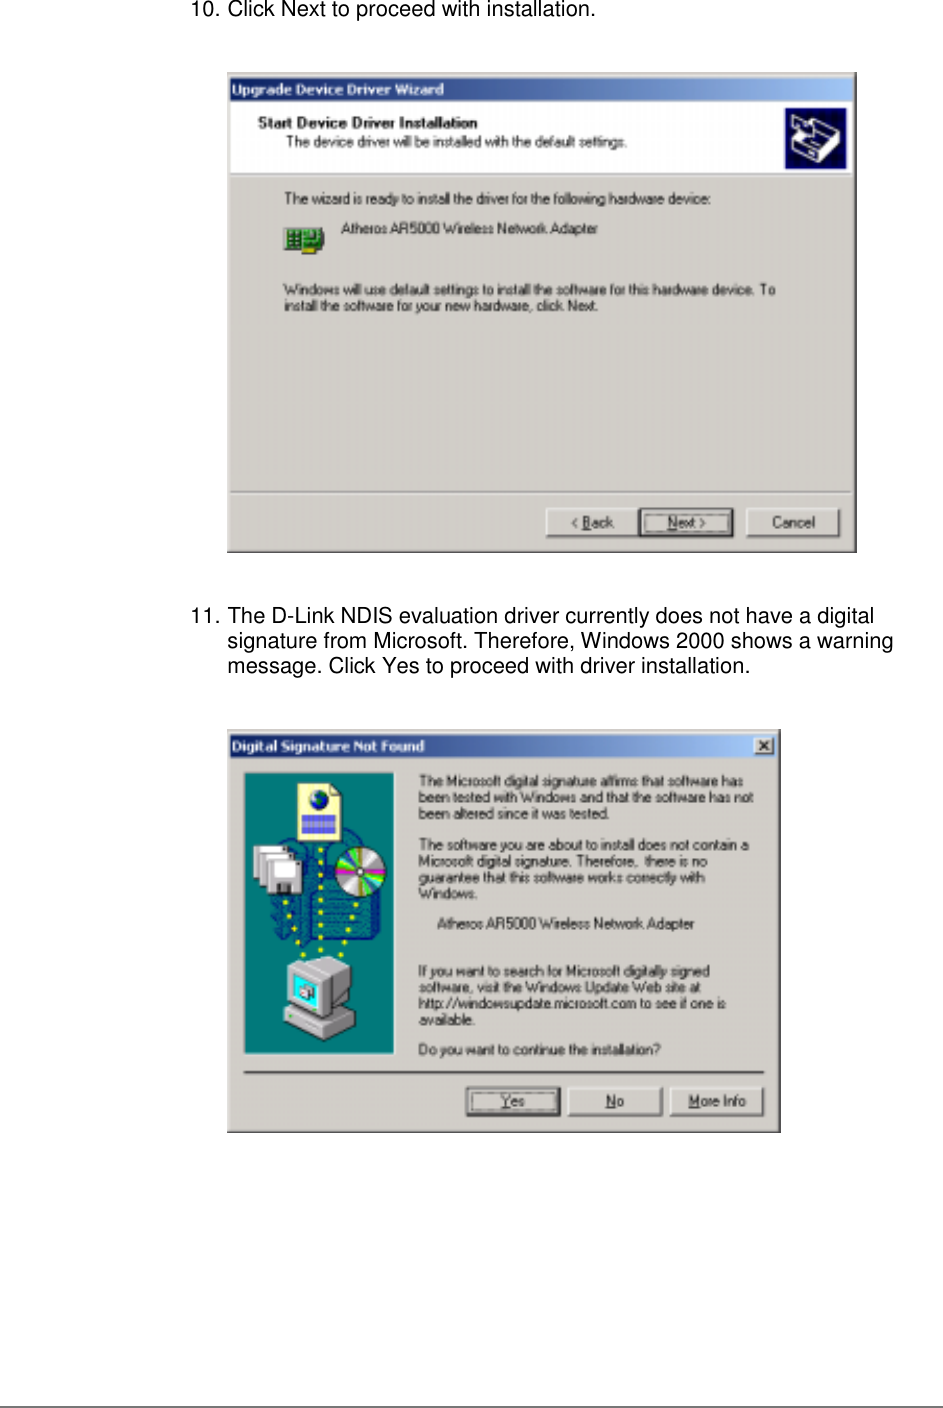 10. Click Next to proceed with installation.11. The D-Link NDIS evaluation driver currently does not have a digitalsignature from Microsoft. Therefore, Windows 2000 shows a warningmessage. Click Yes to proceed with driver installation.